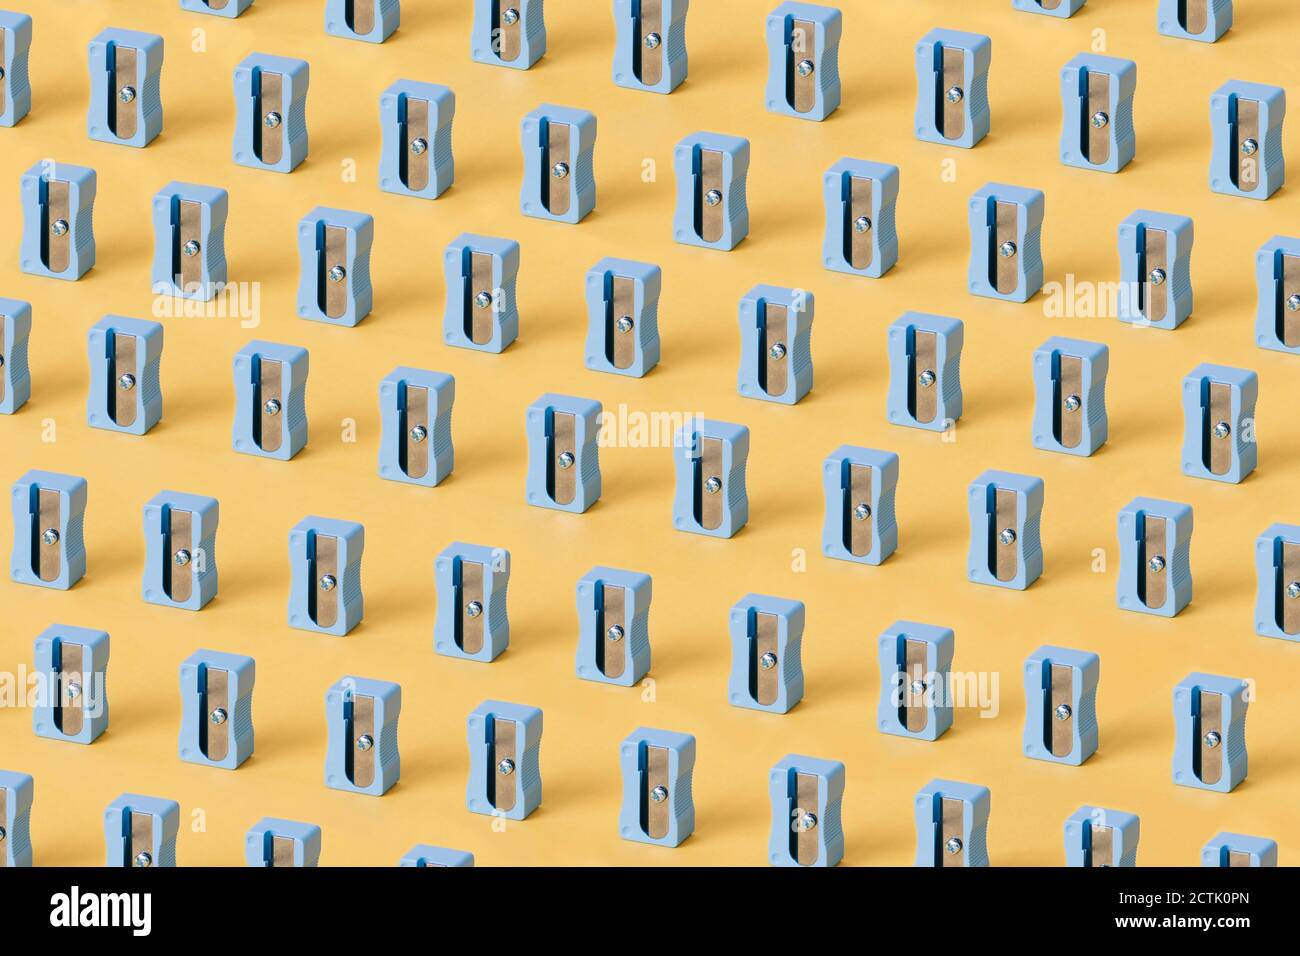 Blue pencil sharpeners against yellow background Stock Photo